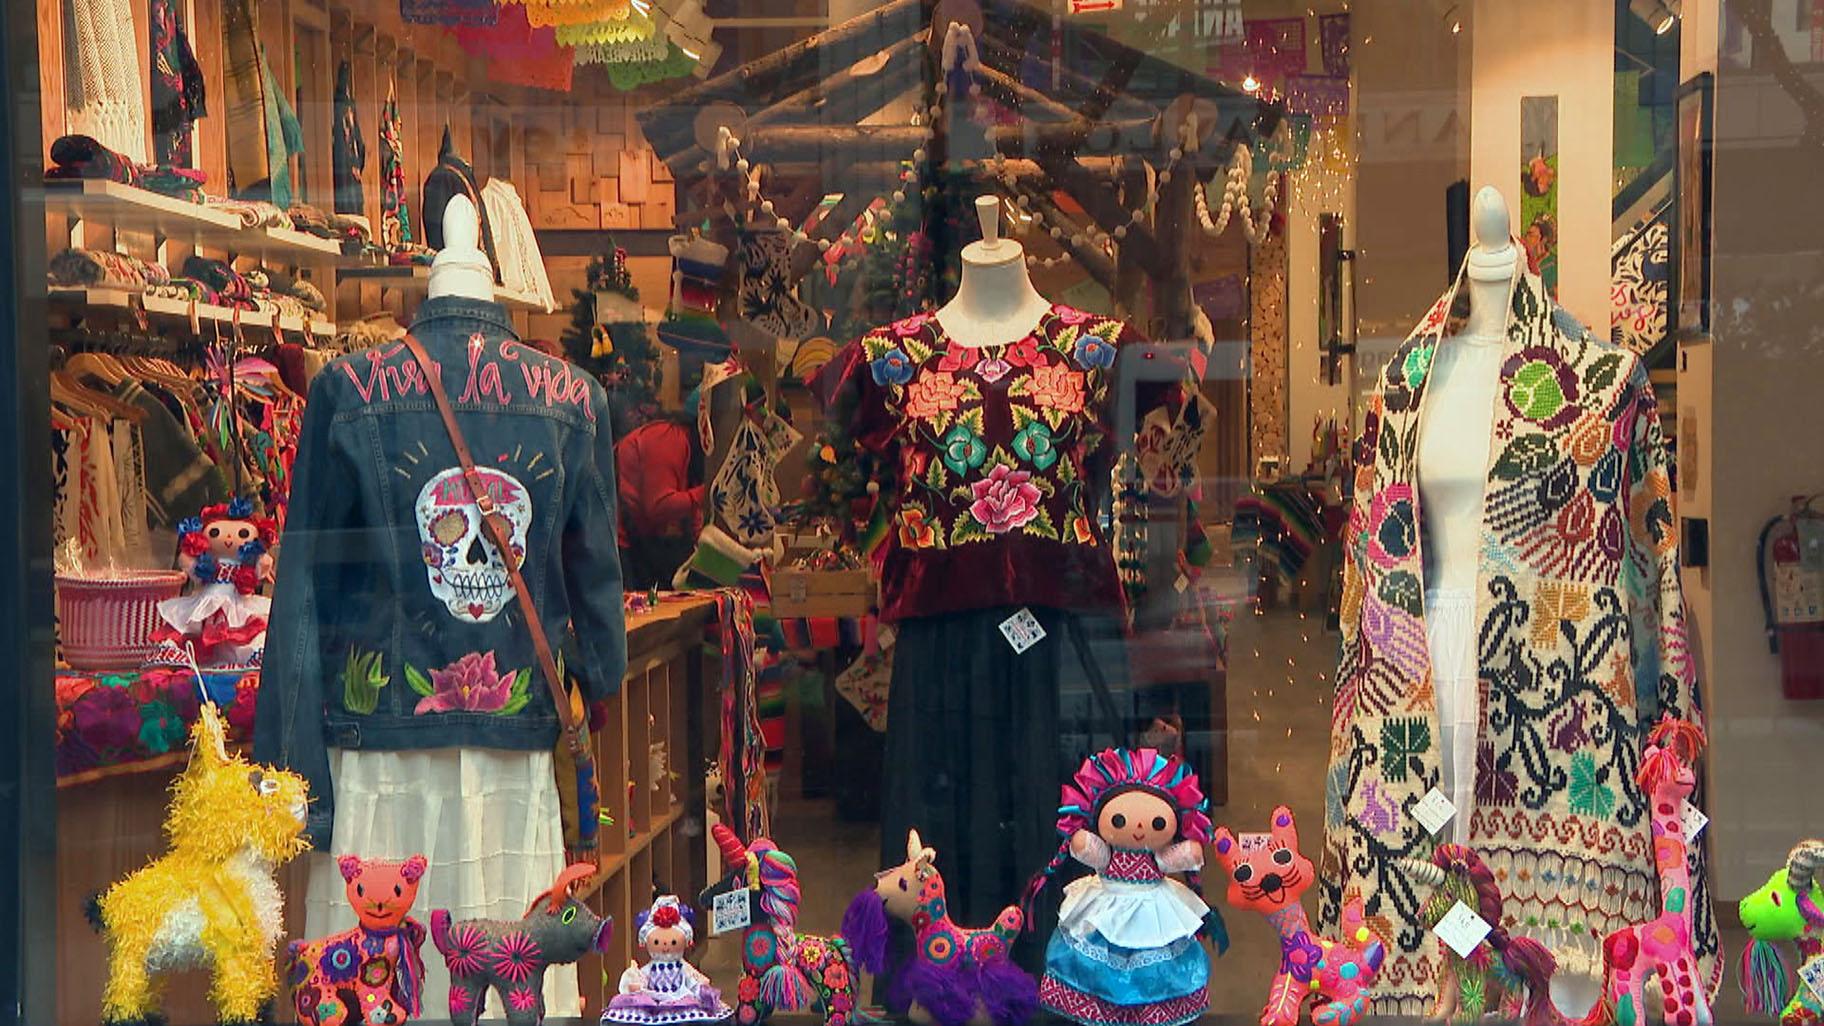 On the Magnificent Mile, Belmont-Cragin Colores Mexicanos small business offers handcrafted, artisanal items from states across Mexico until the end of December.  (WTTW News)